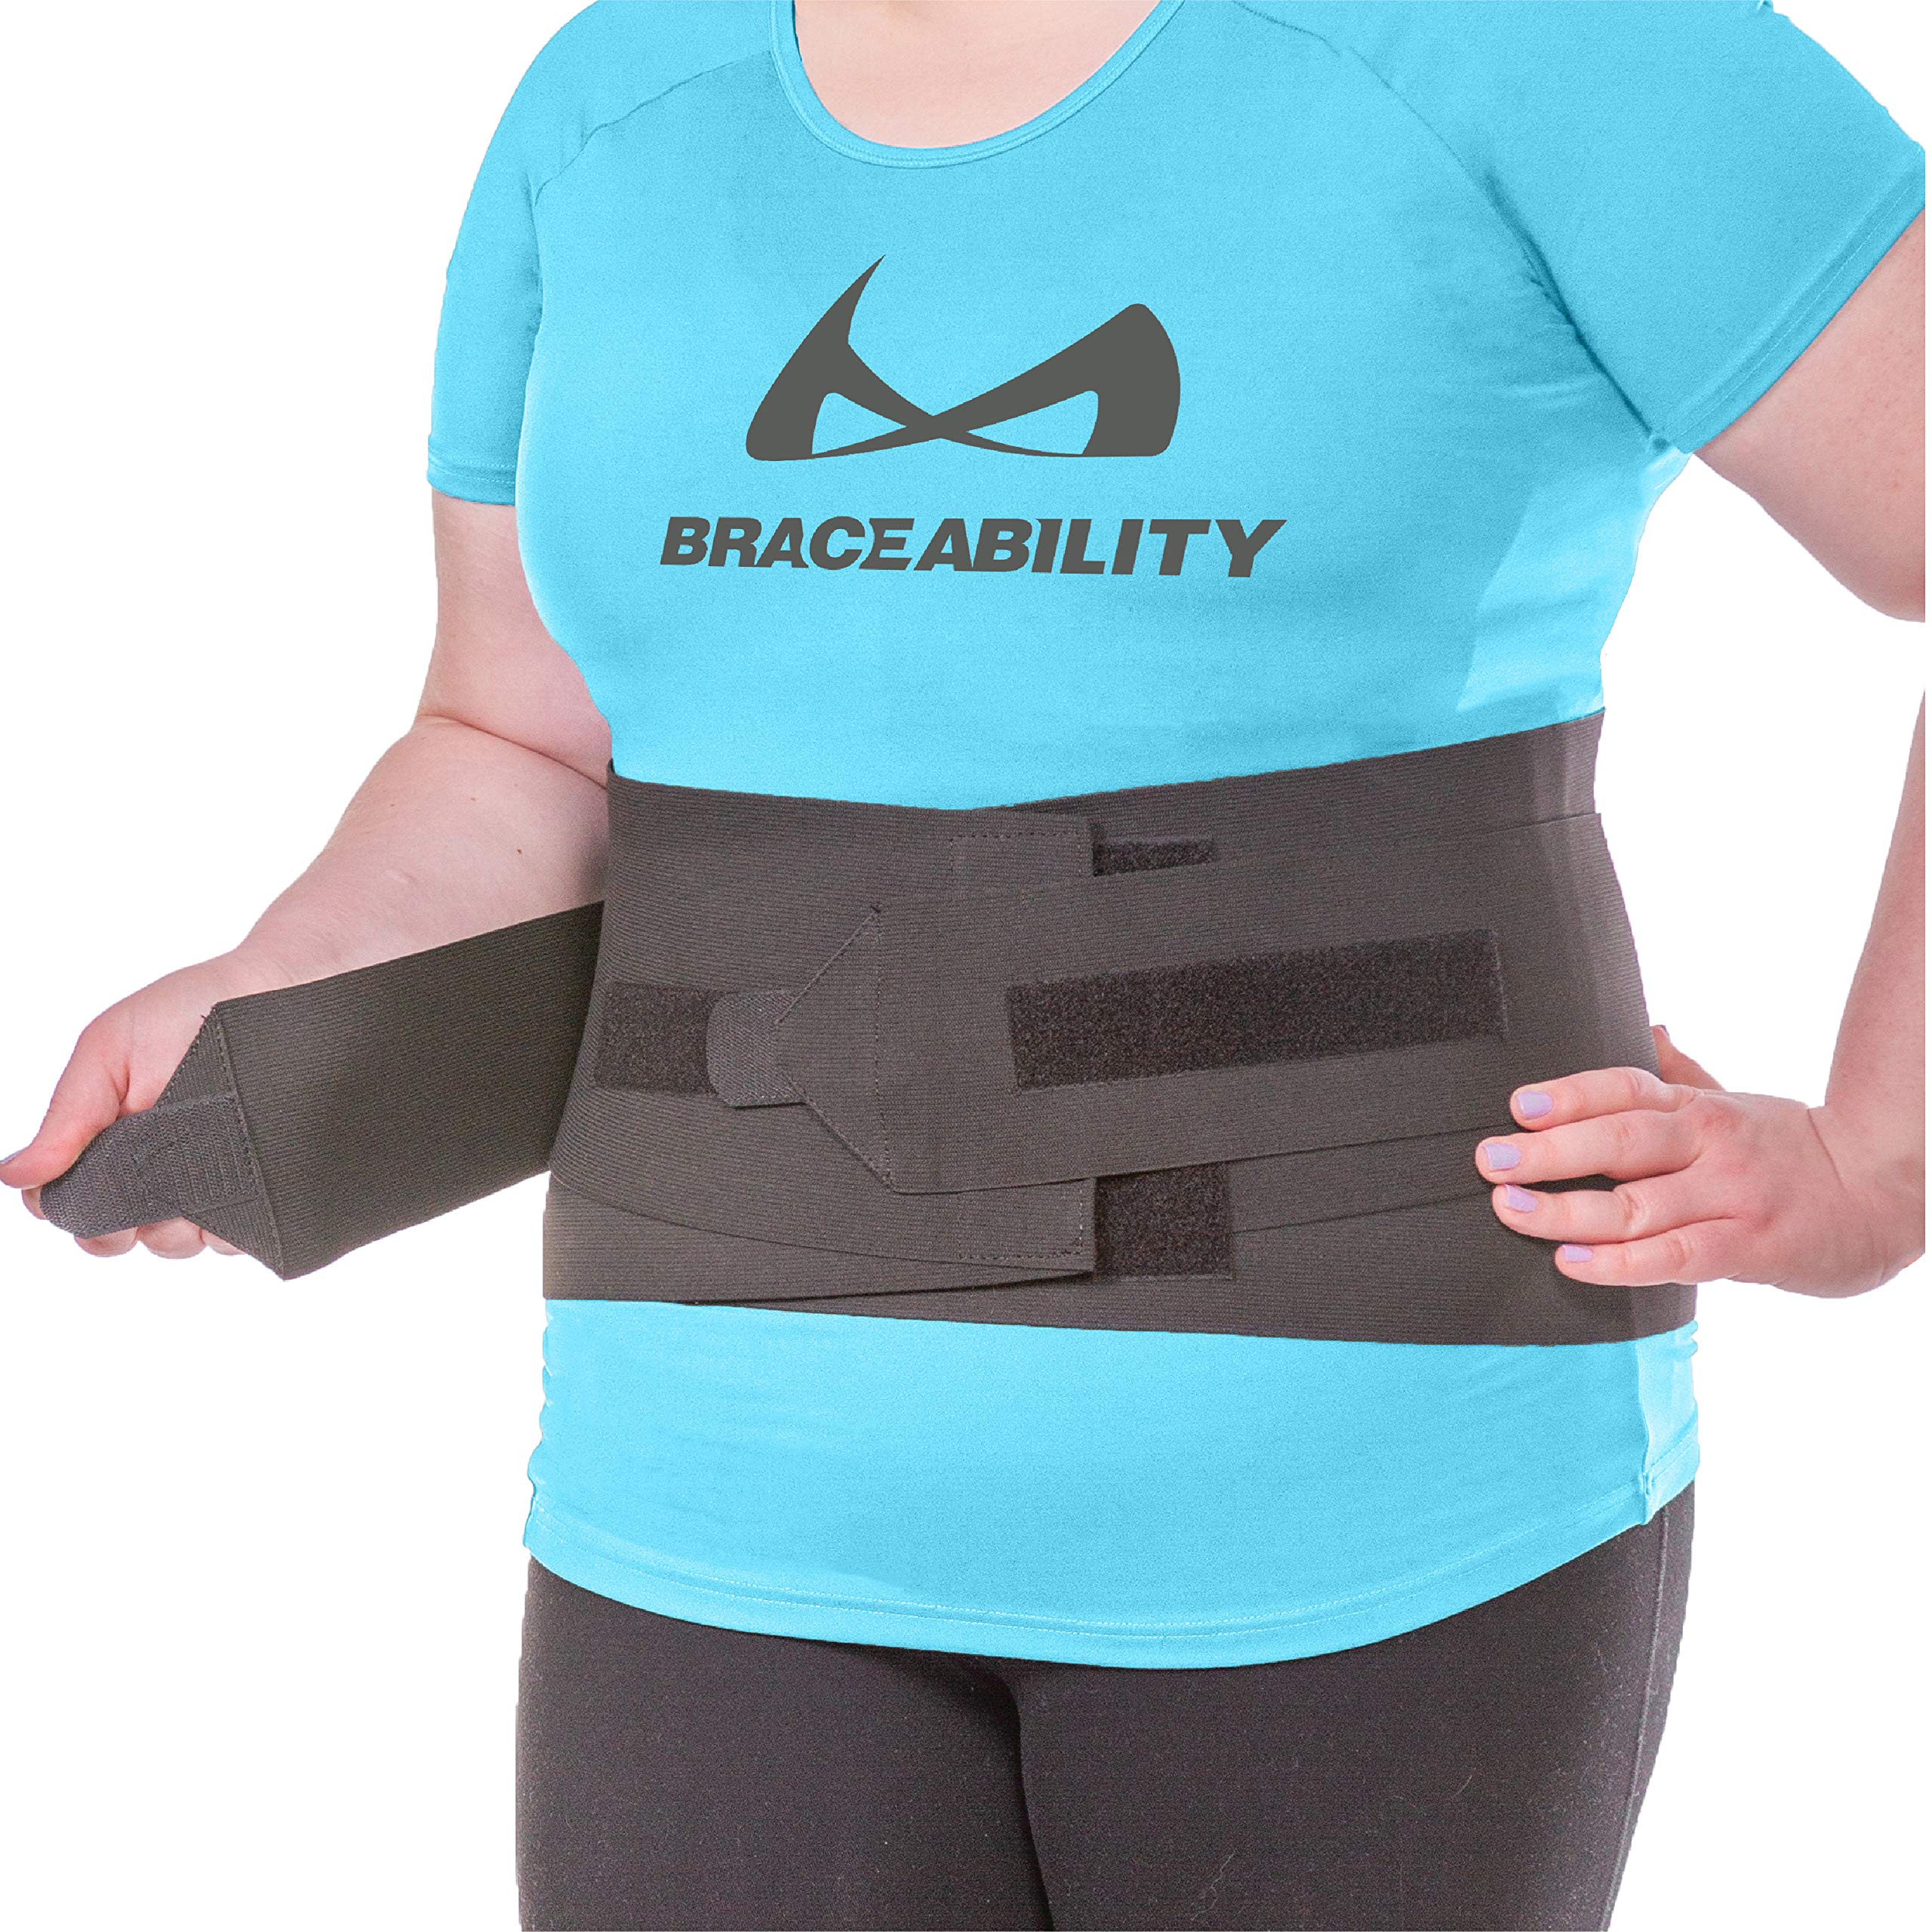  BraceAbility Plus Size Low Back Brace - Compression Lower Back  Support Belt For Sciatica, Heavy Lifting At Work, Herniated Disc, Workouts,  Sleeping, Lumbar Support, Back Pain In Women And Men